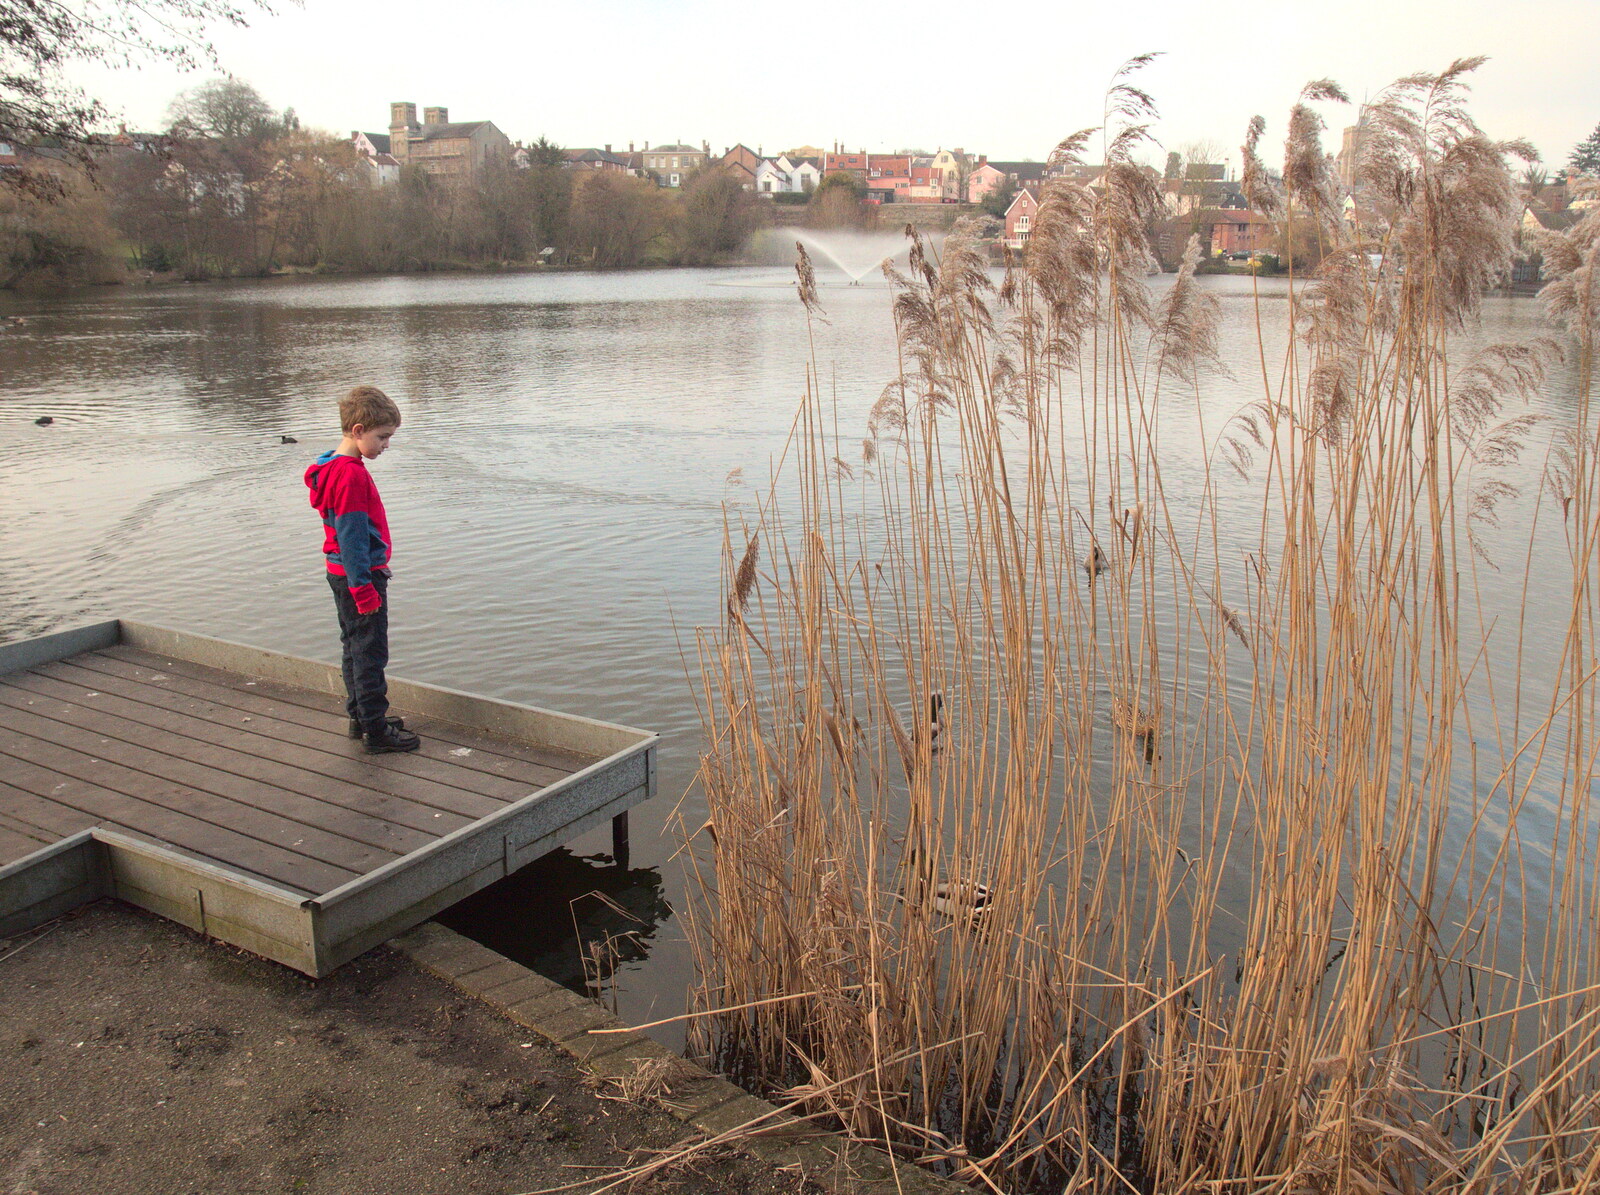 Fred on a fishing pontoon from Little Venice and Diss Park, West London and Norfolk - 17th February 2017